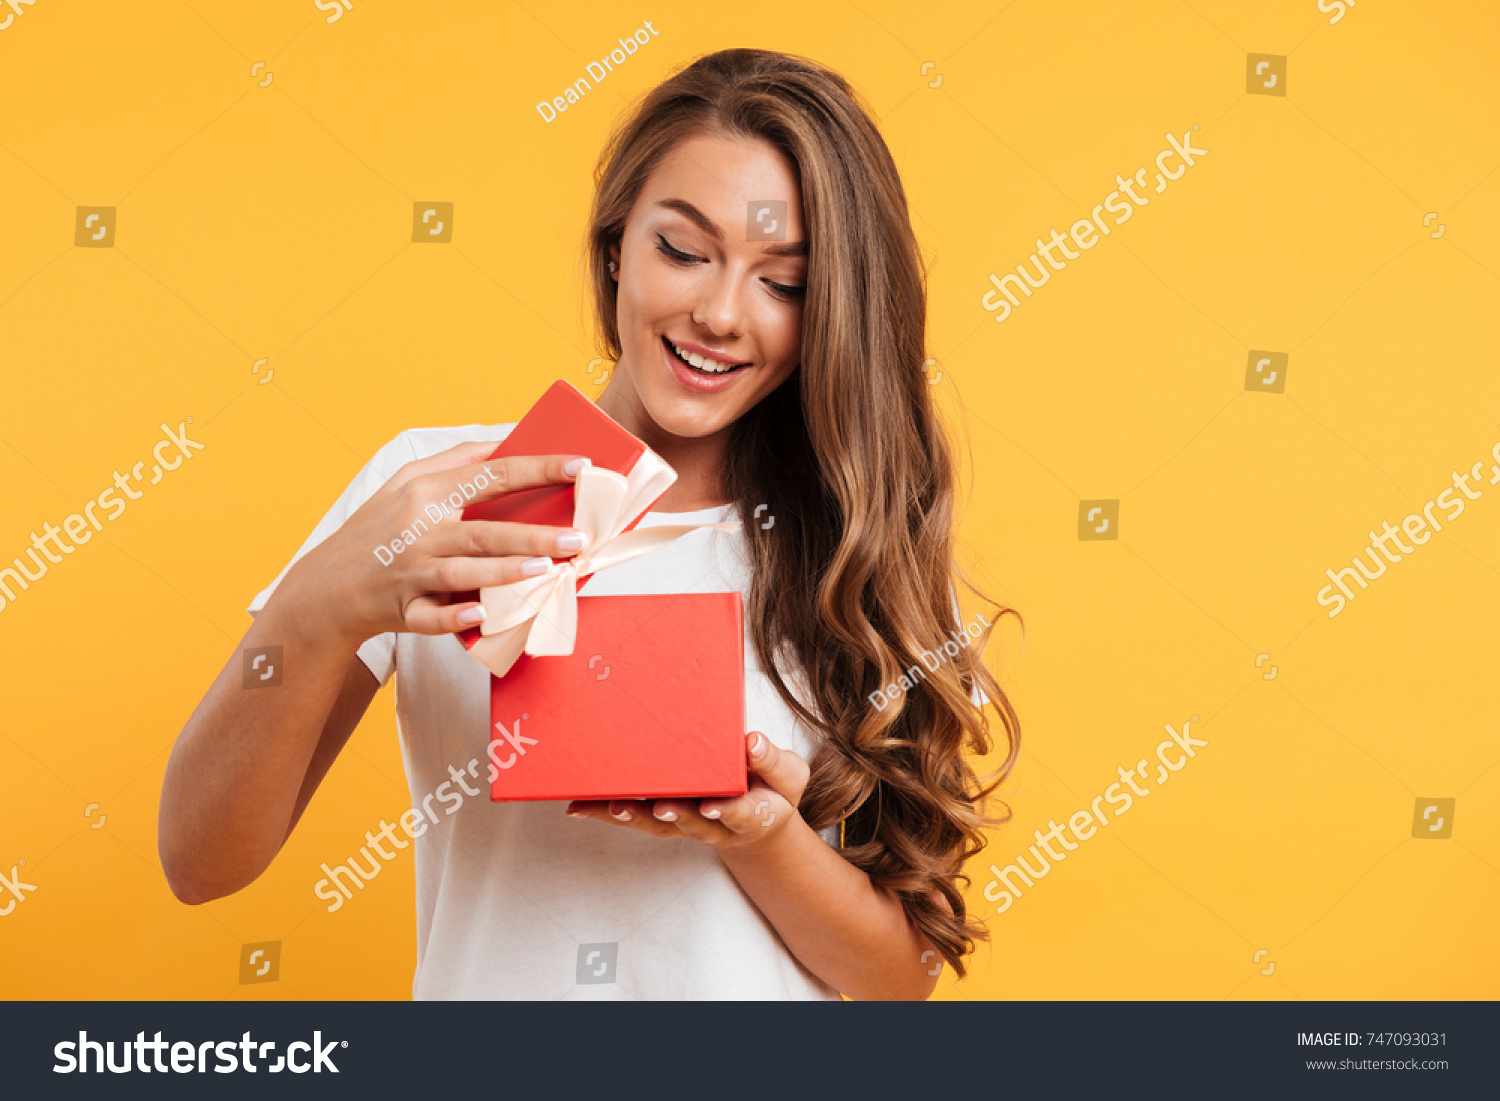 Portrait of a happy smiling girl opening a gift box isolated over yellow background #747093031